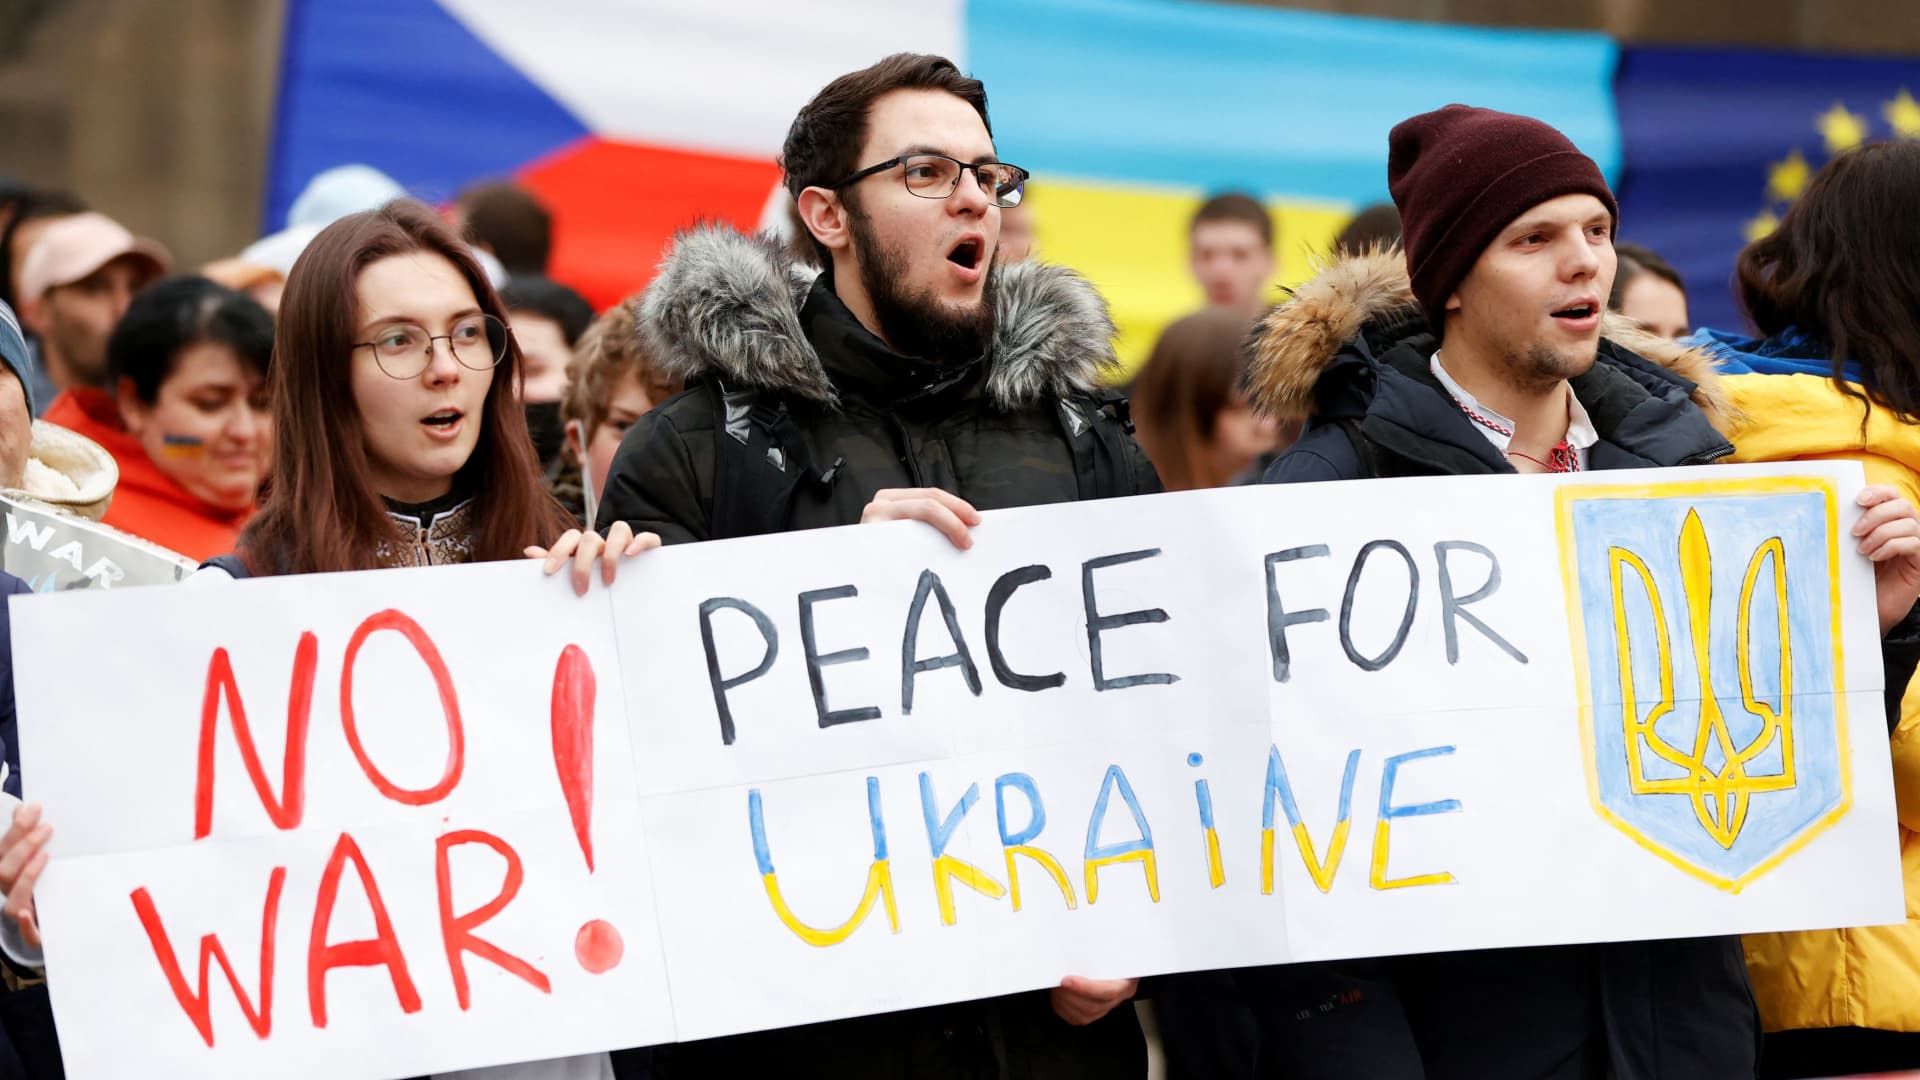 Demonstrators attend a rally in support of Ukraine after Russian President Vladimir Putin authorized a military operation in eastern Ukraine, in Prague, Czech Republic, February 24, 2022.